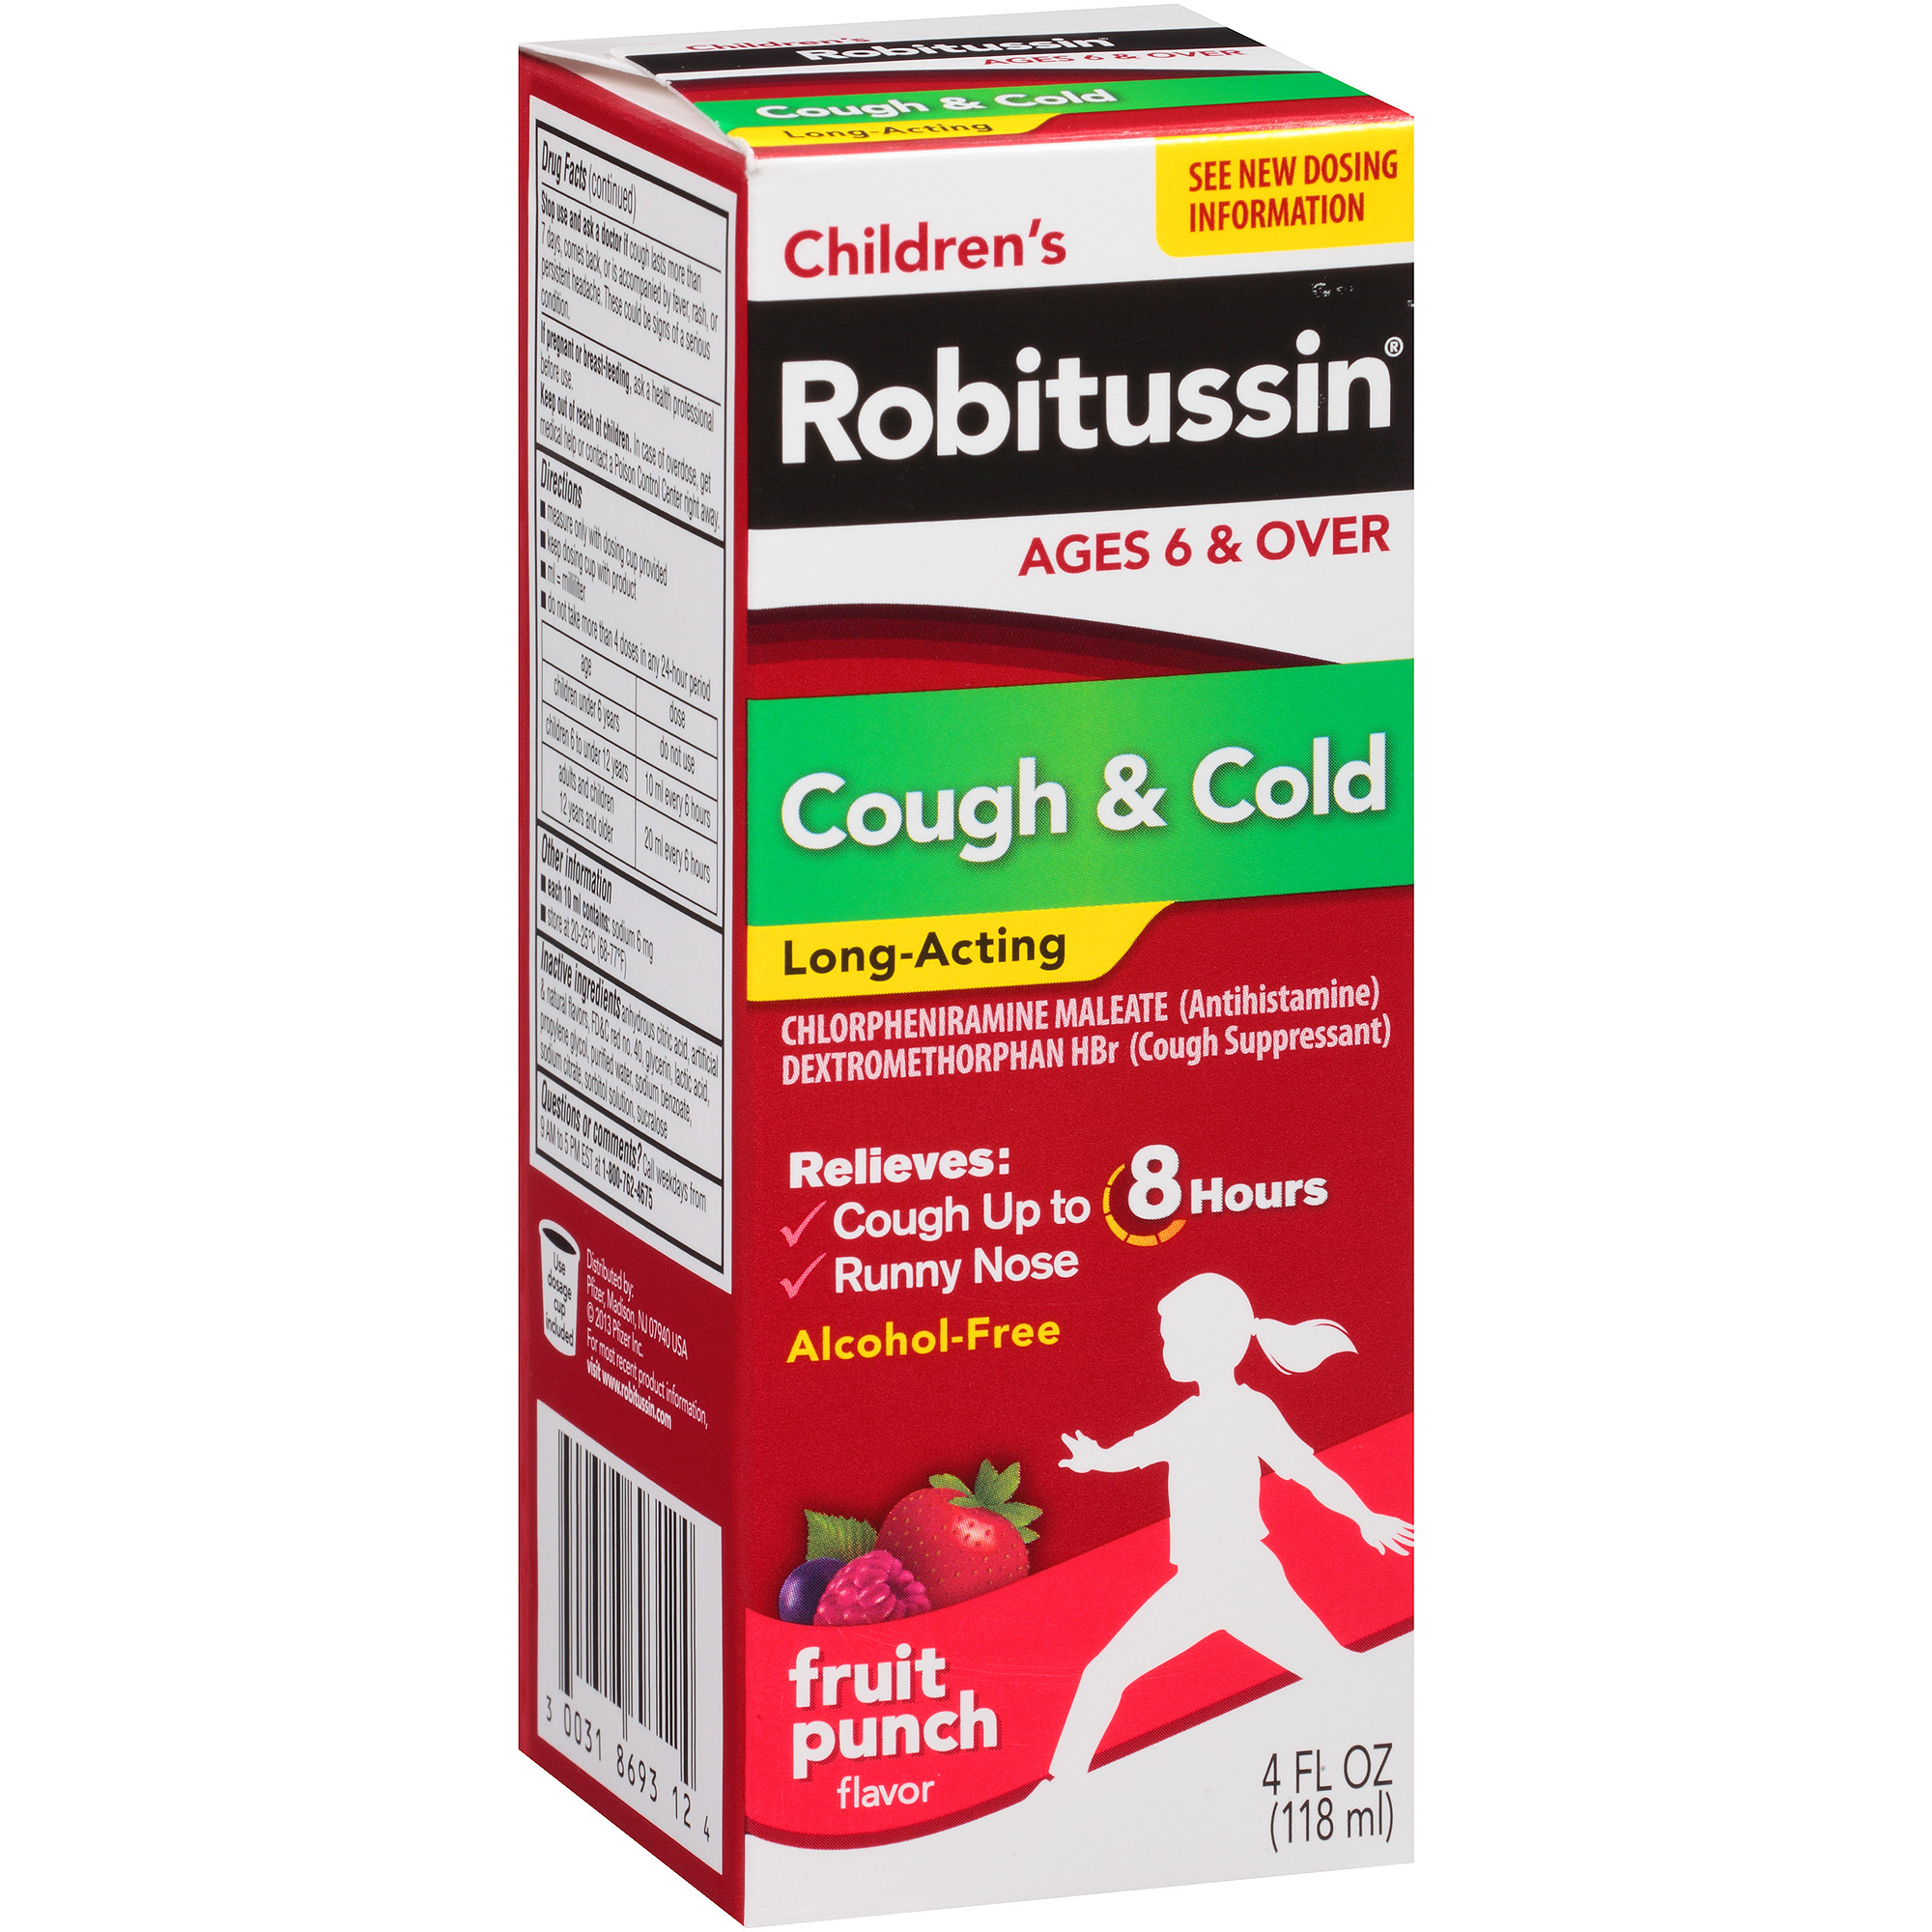 Can you take NyQuil and Robitussin together